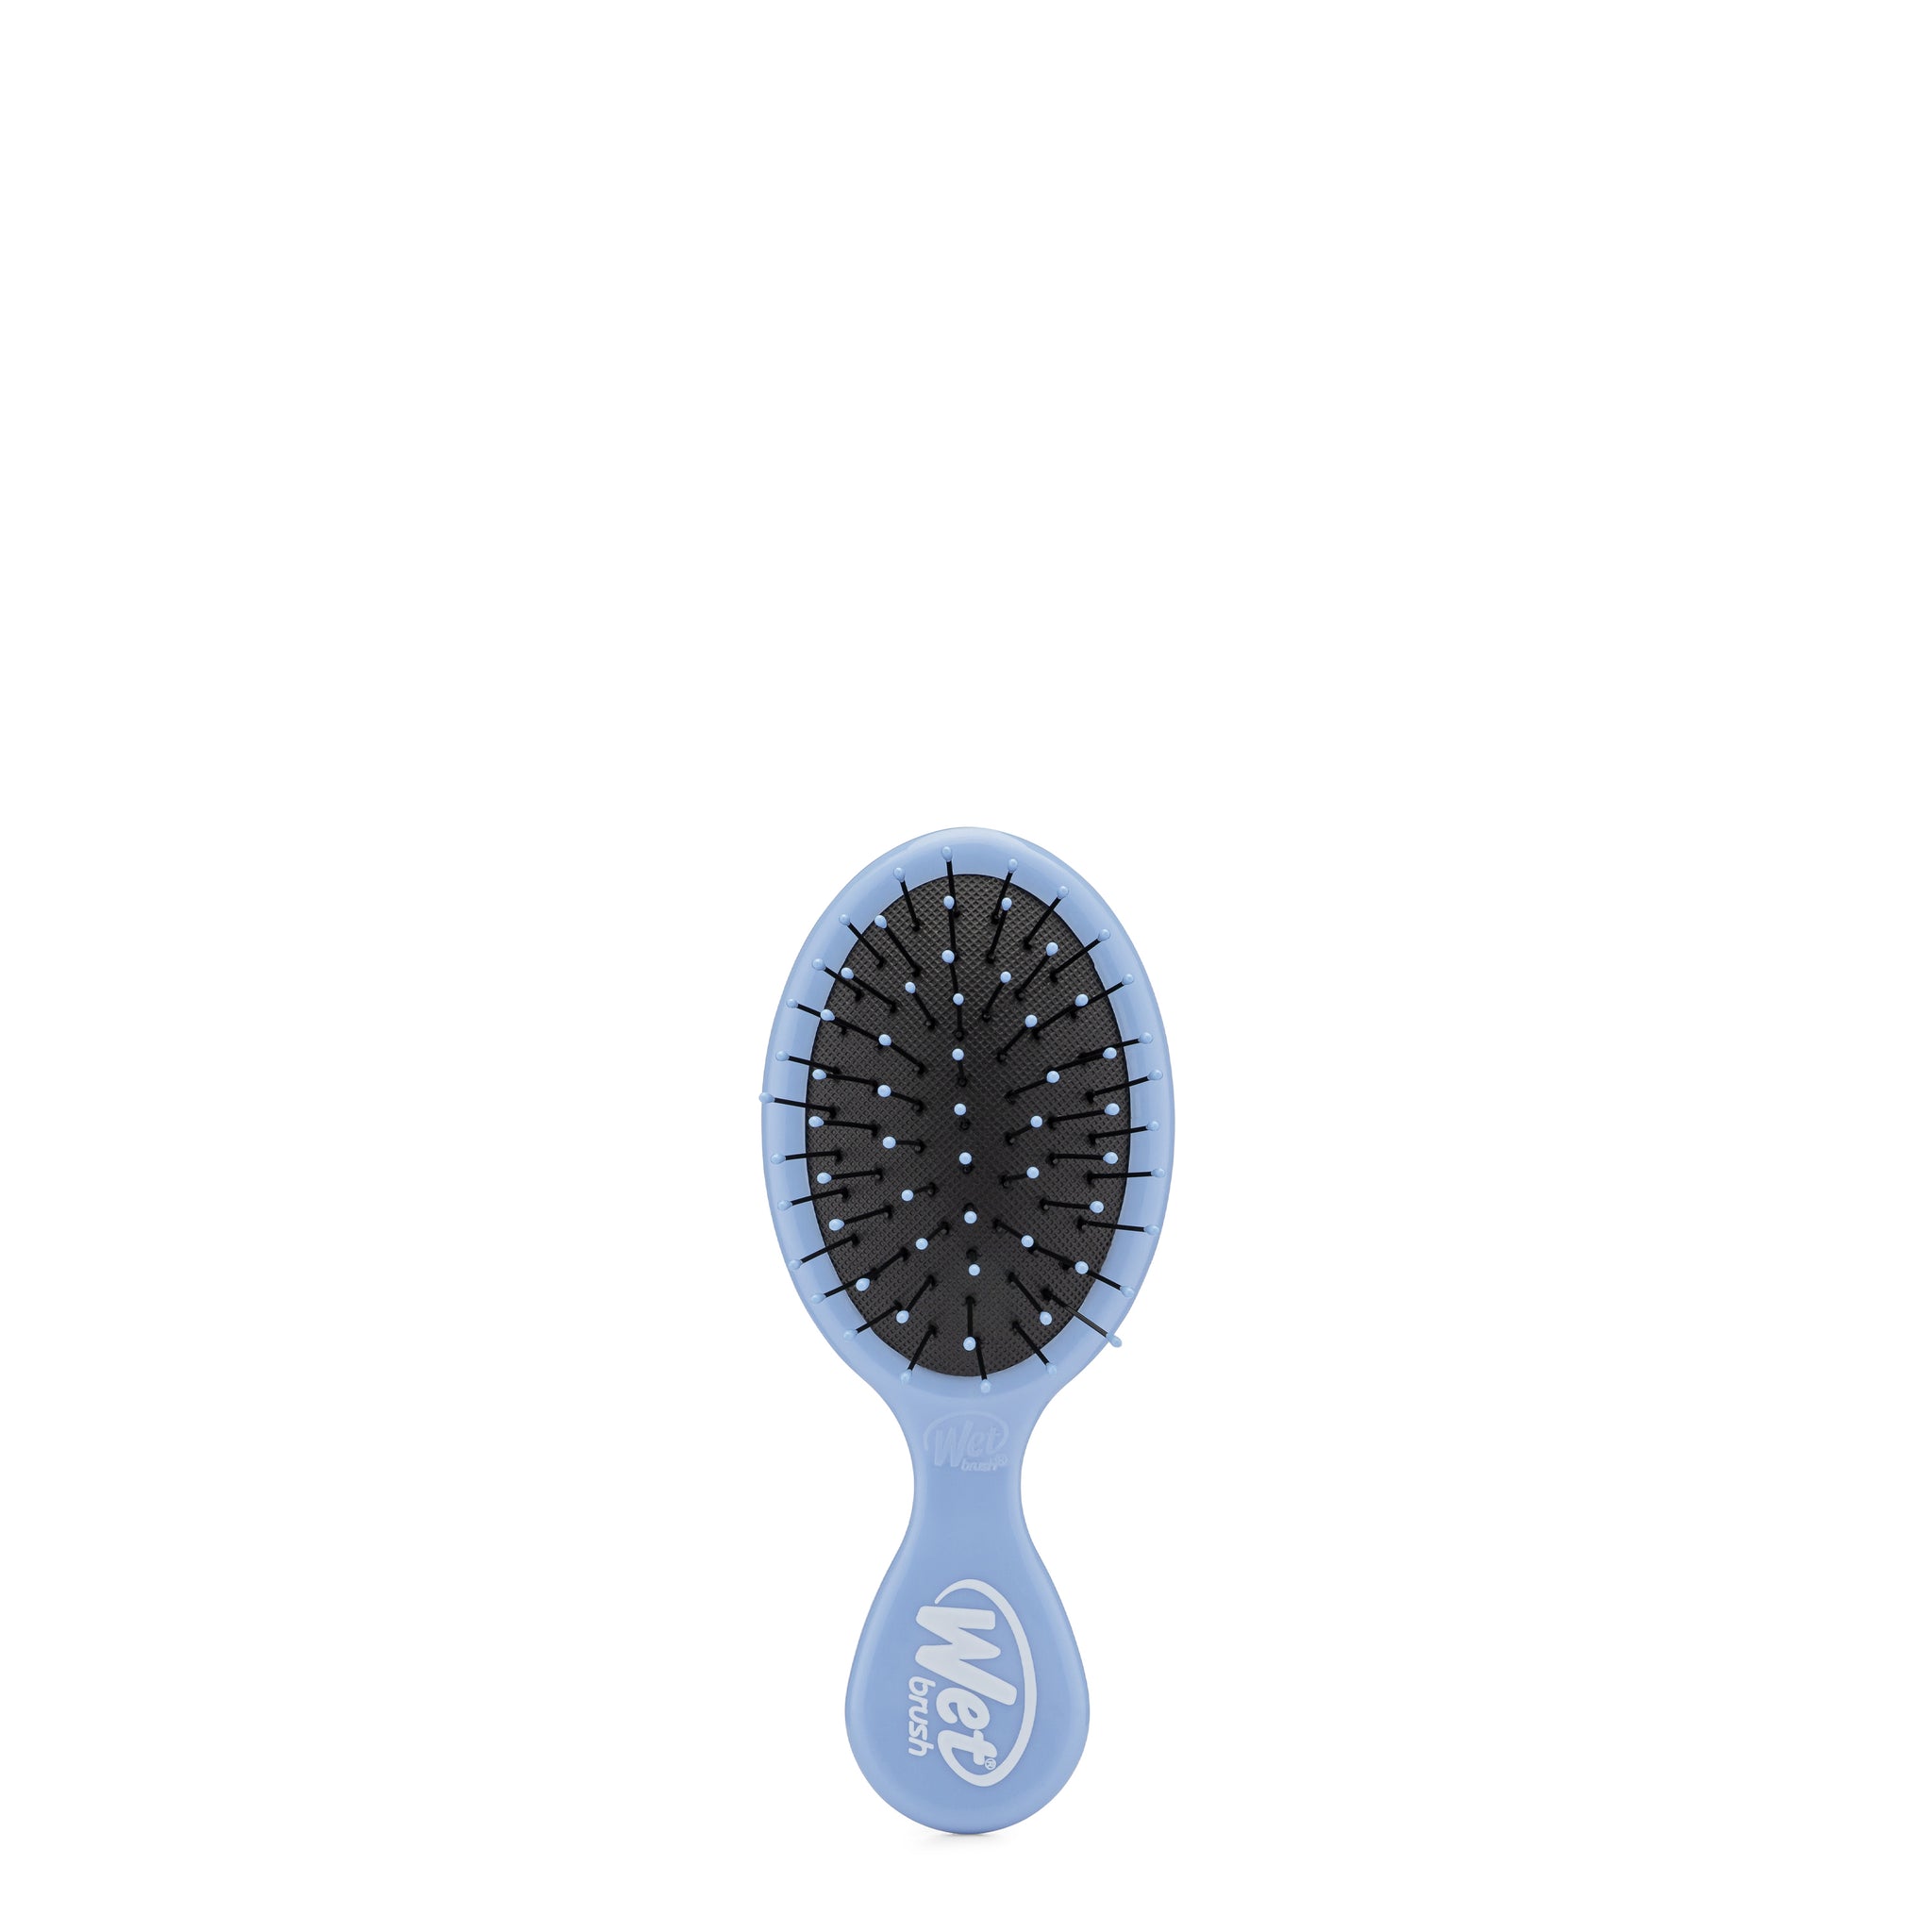 Wet Brush Squirt / Mini - Pink - Brushes & More Beauty Supply